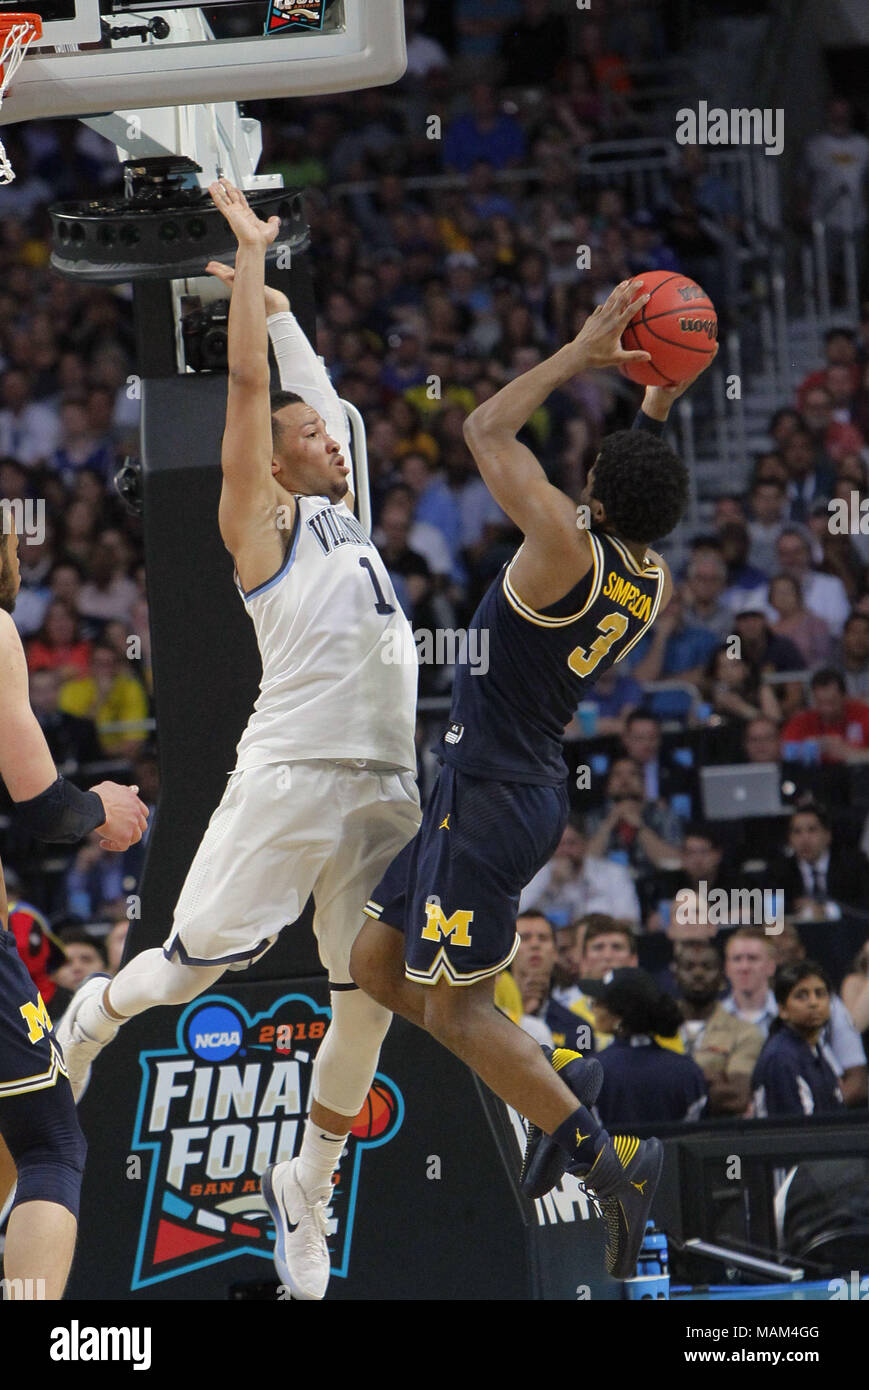 San Antonio, USA. 2nd Apr, 2018. Jalen Brunson (L) of Villanova defends Zavier Simpson of Michigan during the championship game of the Final Four NCAA college basketball tournament, in San Antonio, Texas, the United States, on April 2, 2018. Villanova claimed the title by defeating Michigan with 79-62. Credit: Song Qiong/Xinhua/Alamy Live News Stock Photo